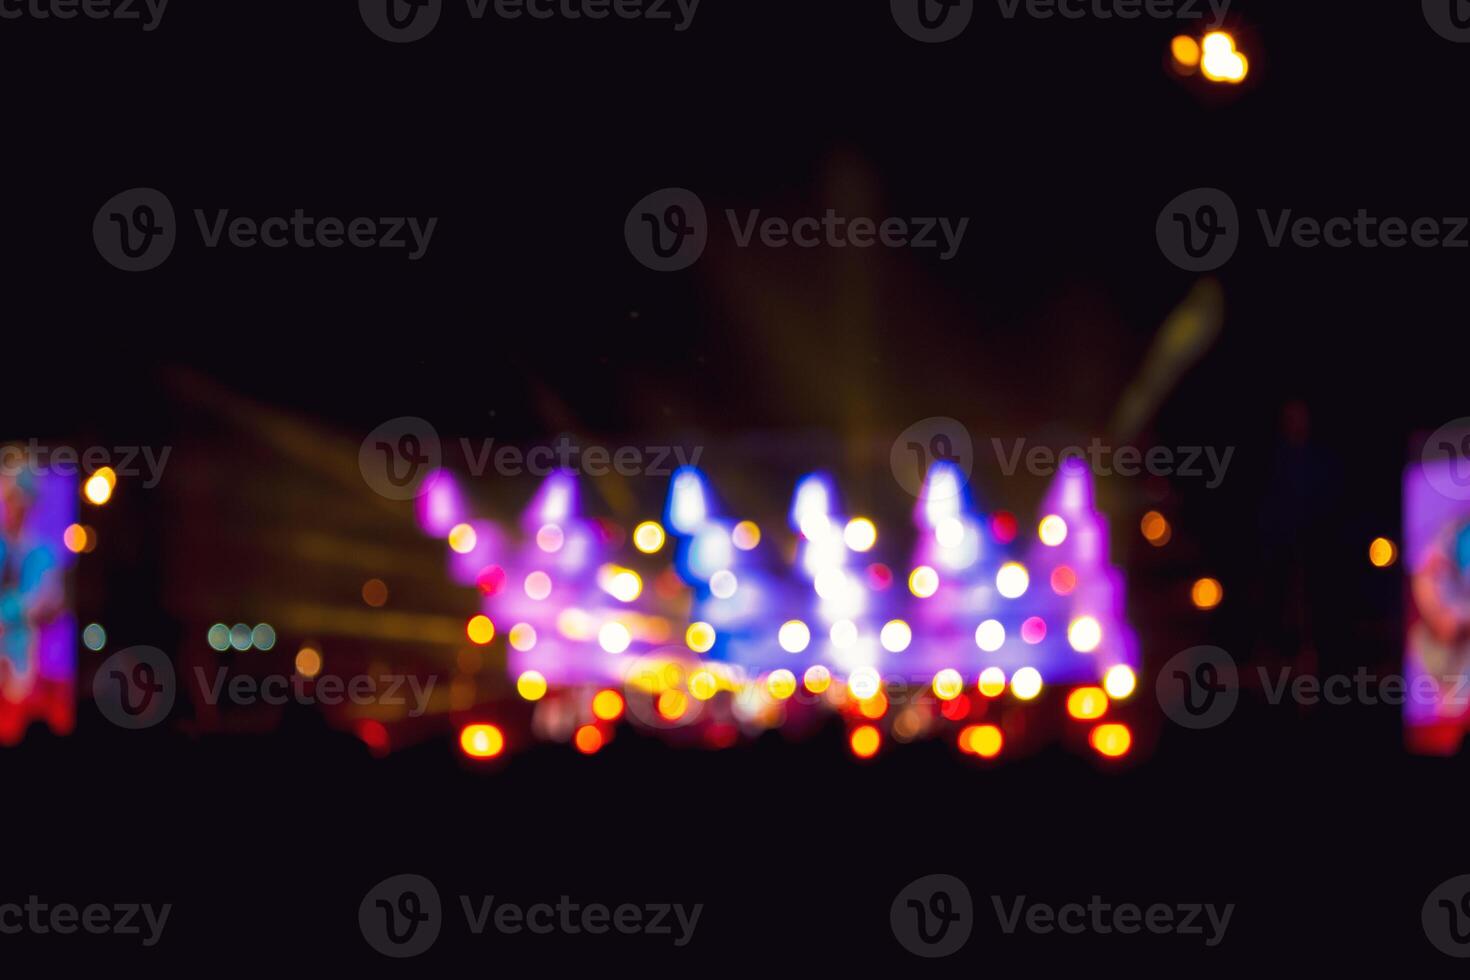 Background image with defocused blurred stage lights photo